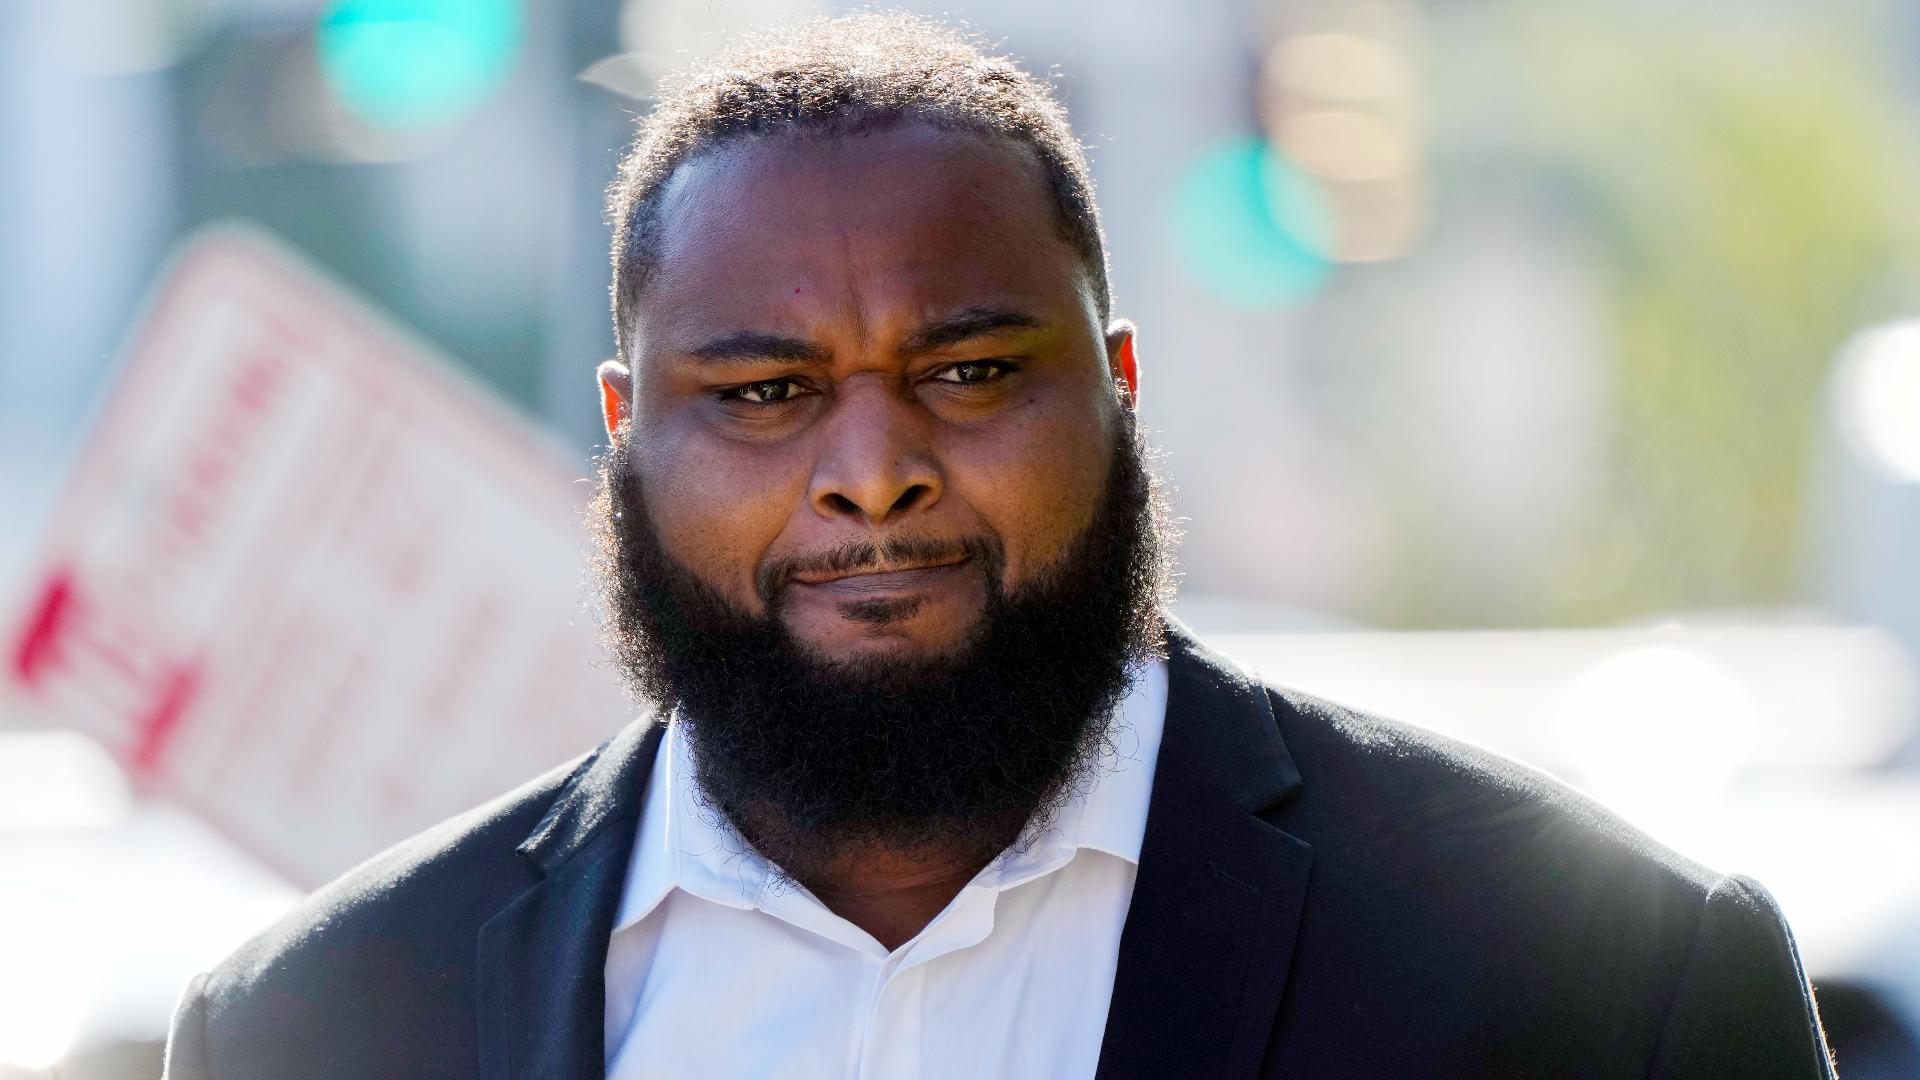 Thursday's hearing in New Orleans marked the second time 36-year-old Cardell Hayes had faced sentencing in the killing.